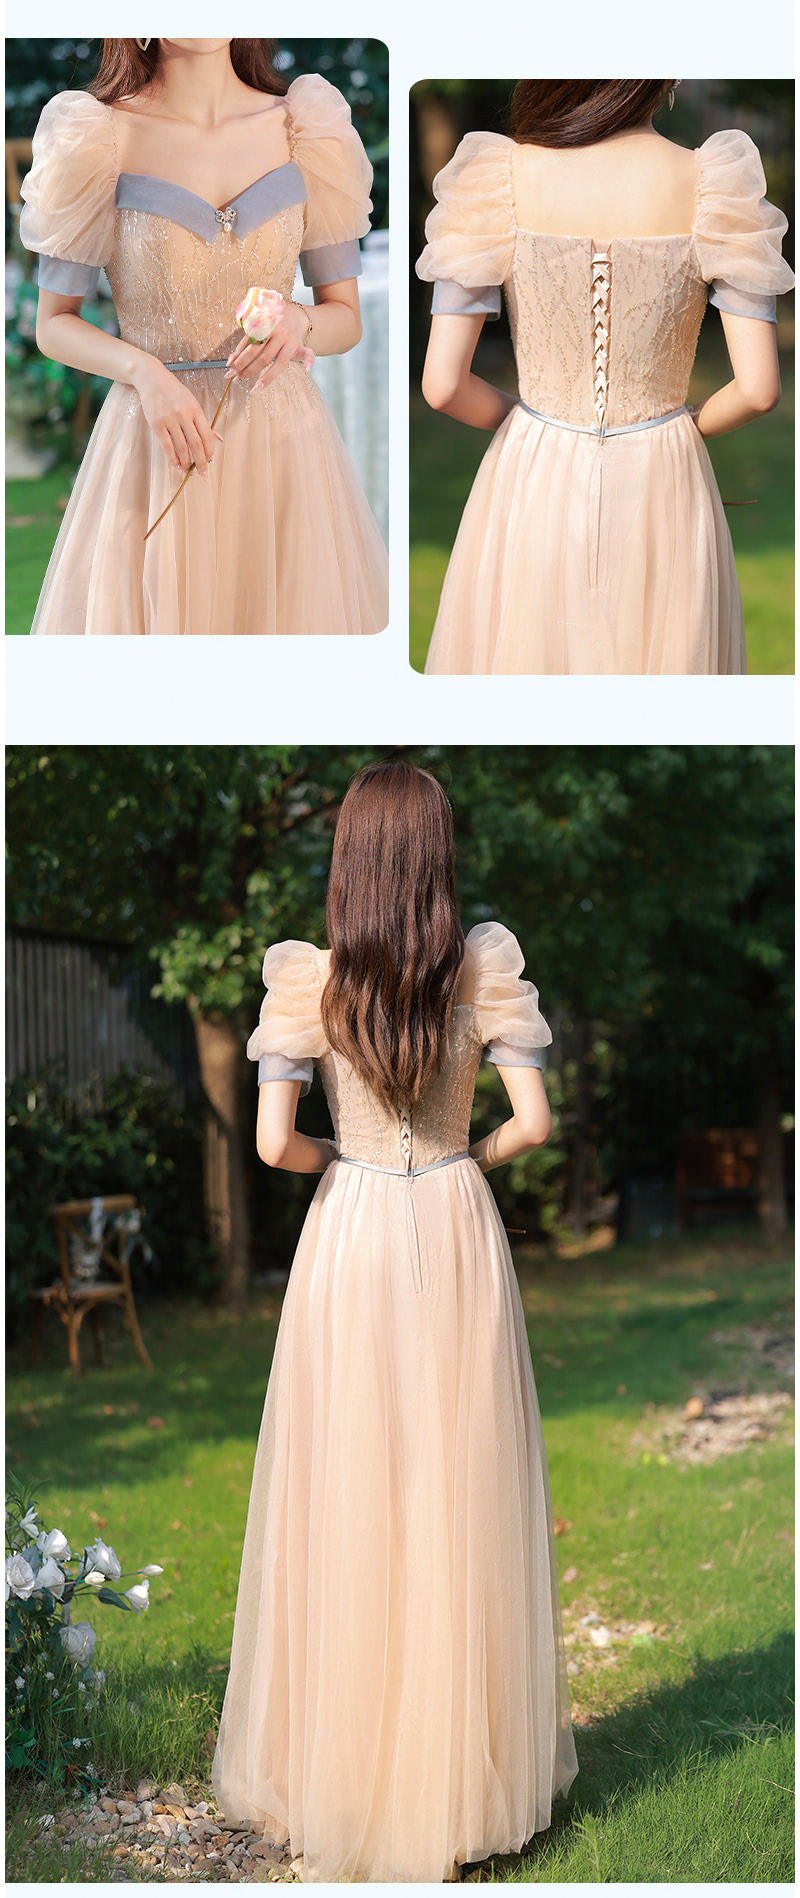 Fairy Bridesmaid Dress Wedding Guest Party Outfit Maxi Gown20